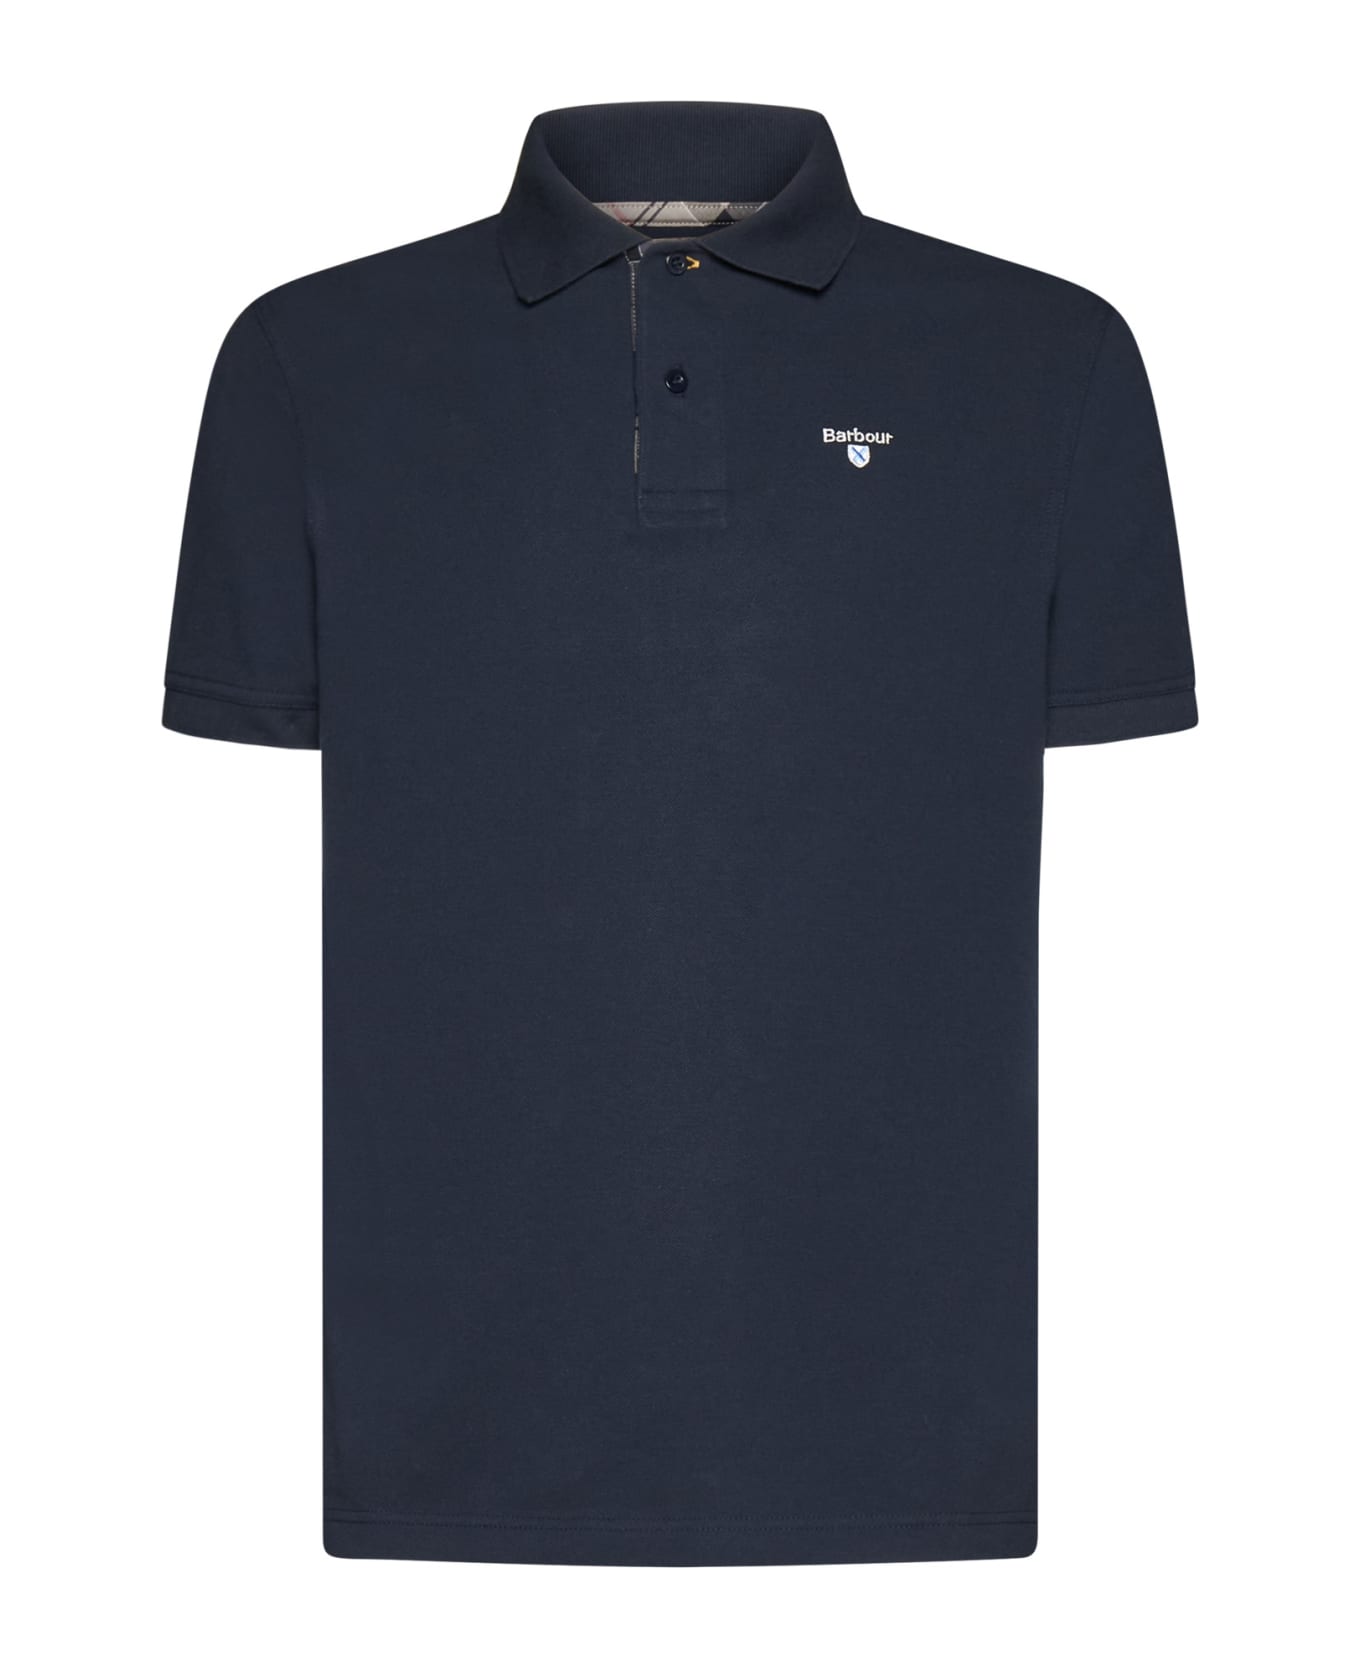 Barbour Polo Shirt - New navy